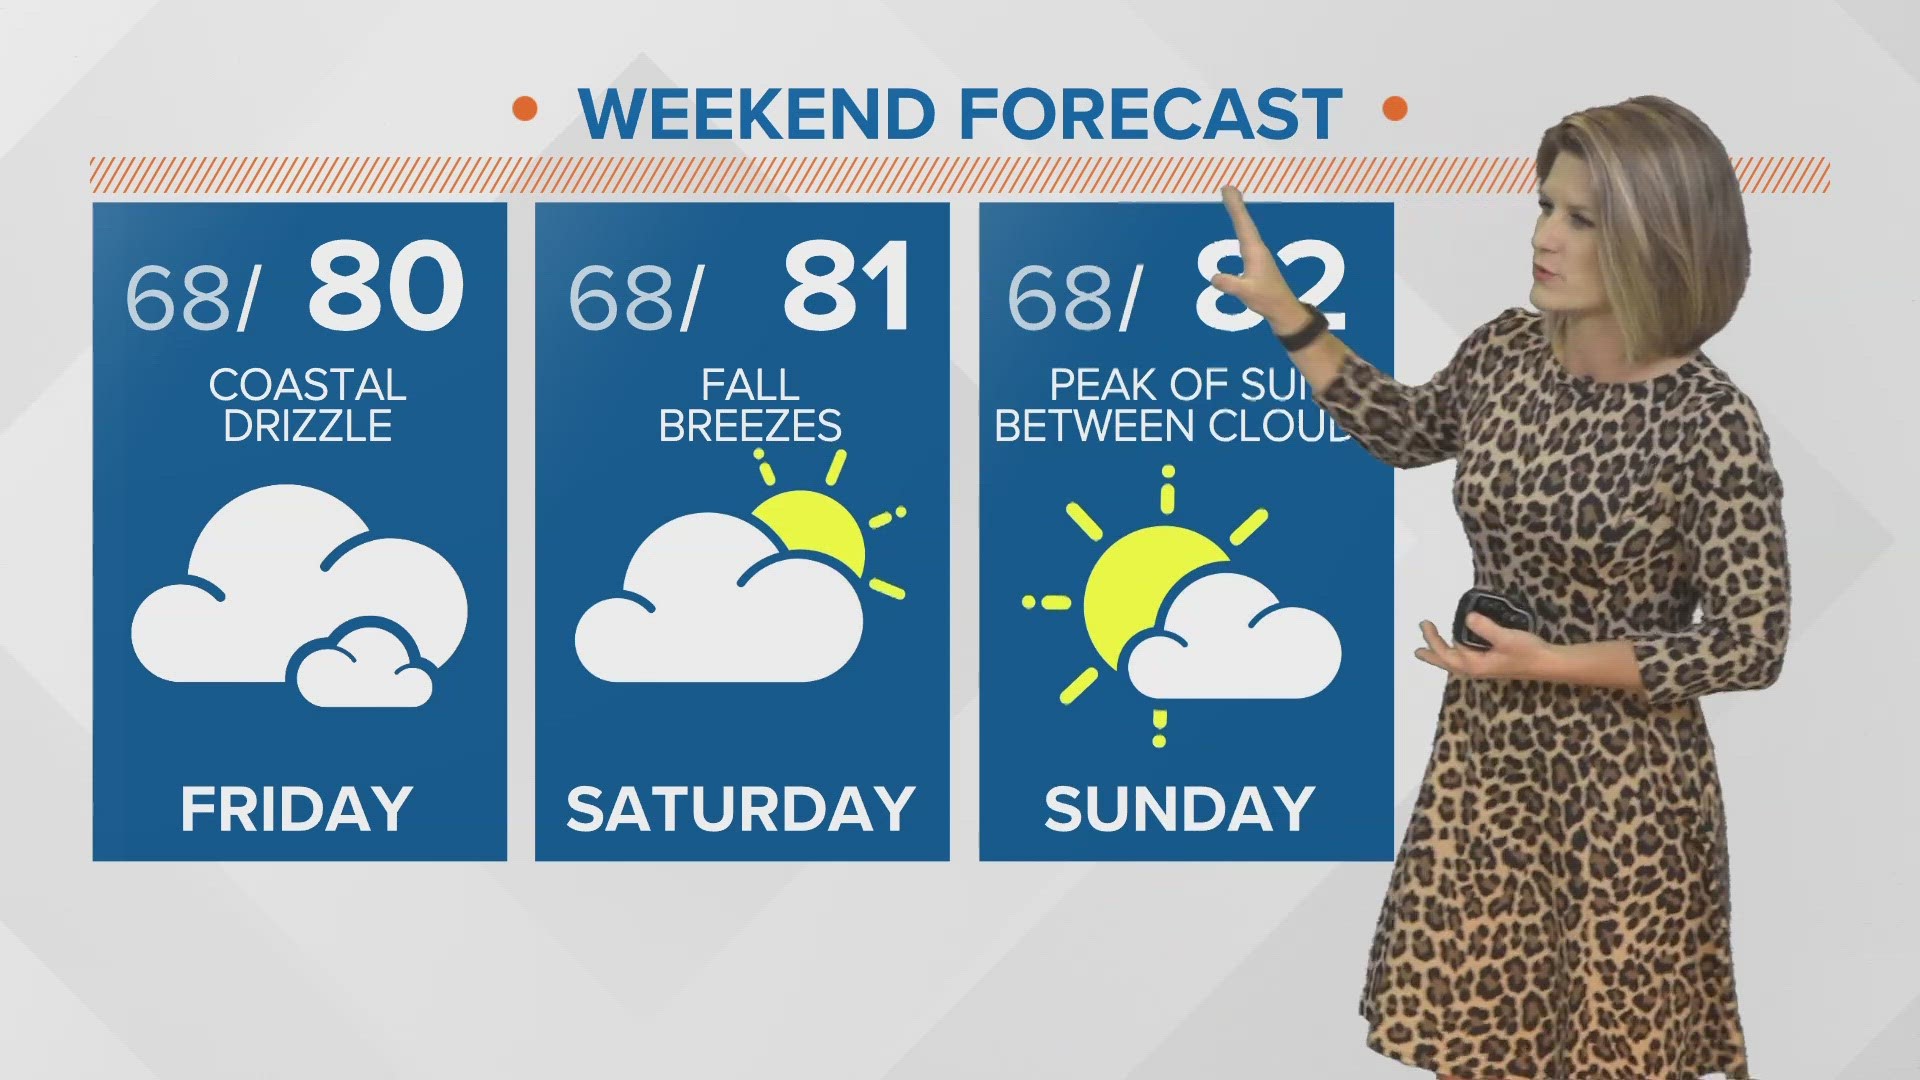 Meteorologist Lauren Rautenkranz says the wind and clouds will hold Jacksonville's afternoon temperatures down near 80 degrees this weekend.